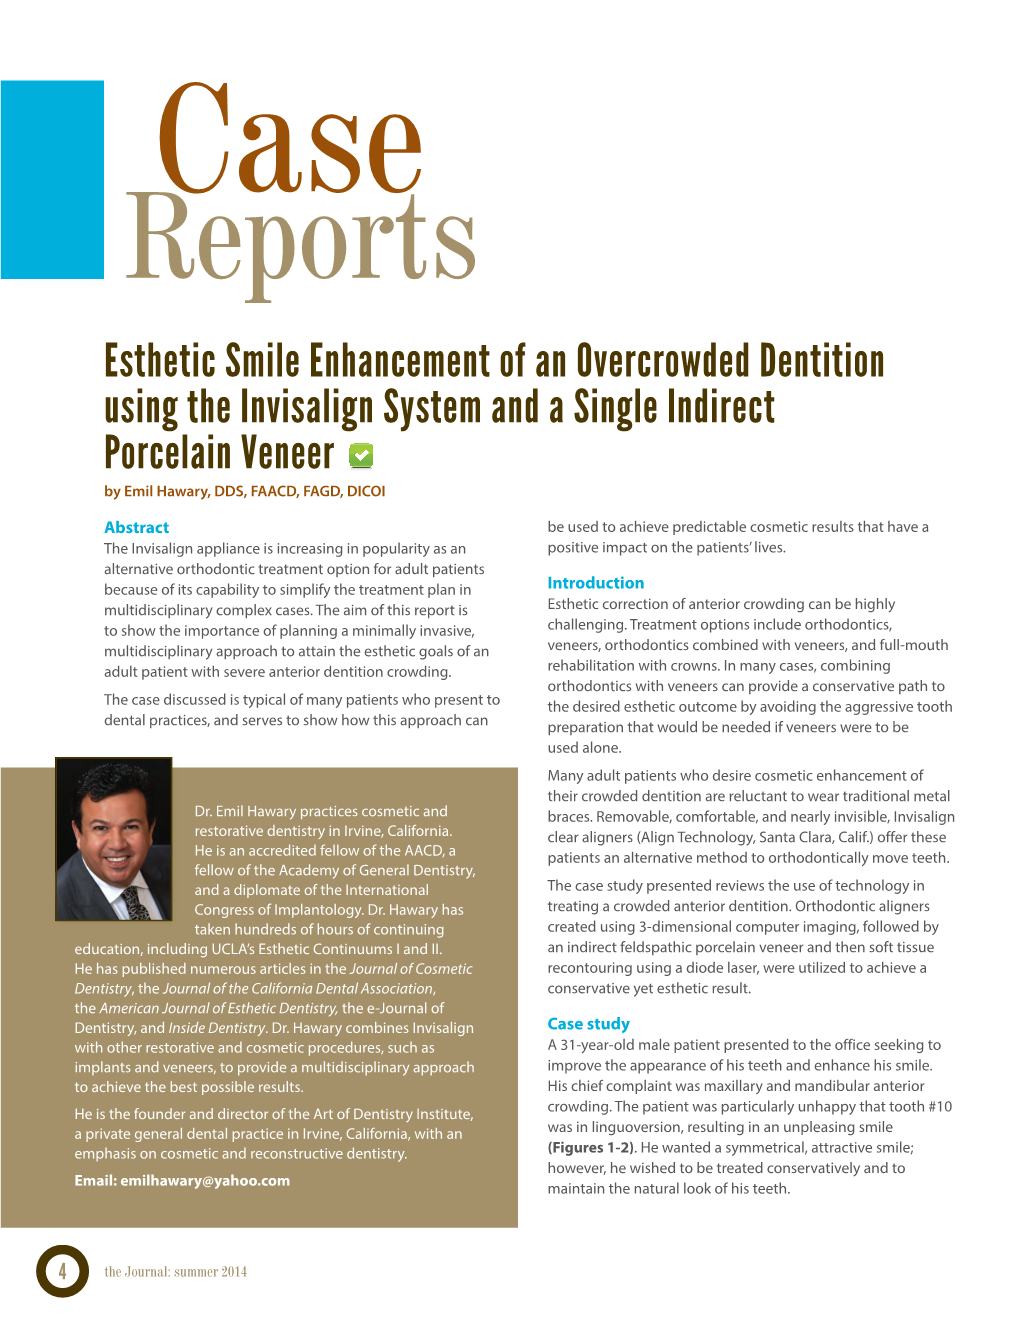 Esthetic Smile Enhancement of an Overcrowded Dentition Using The